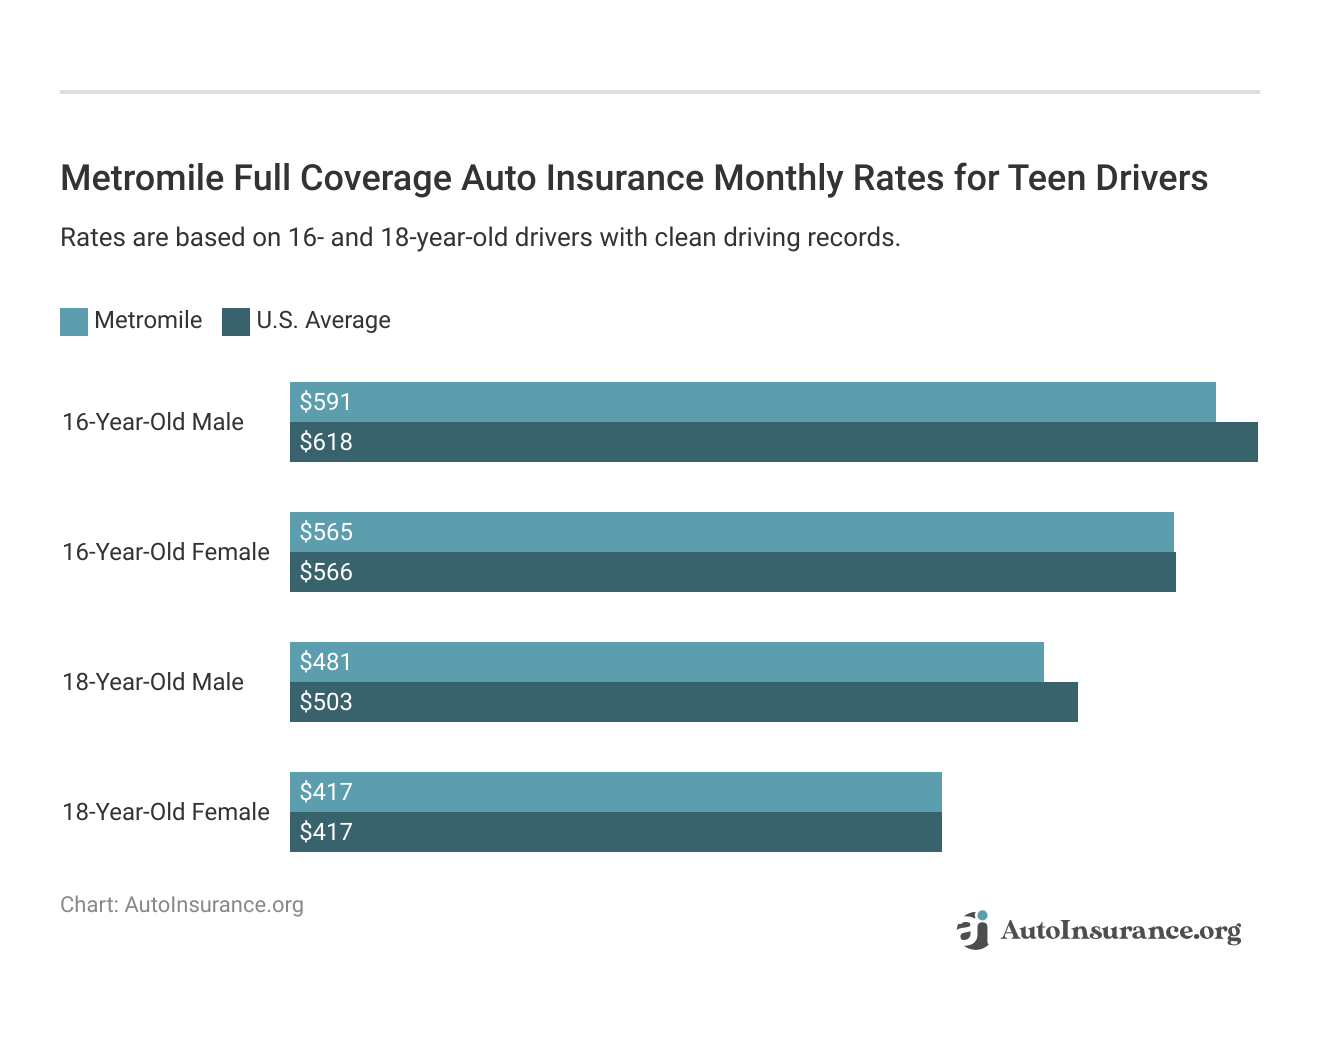 <h3>Metromile Full Coverage Auto Insurance Monthly Rates for Teen Drivers</h3>